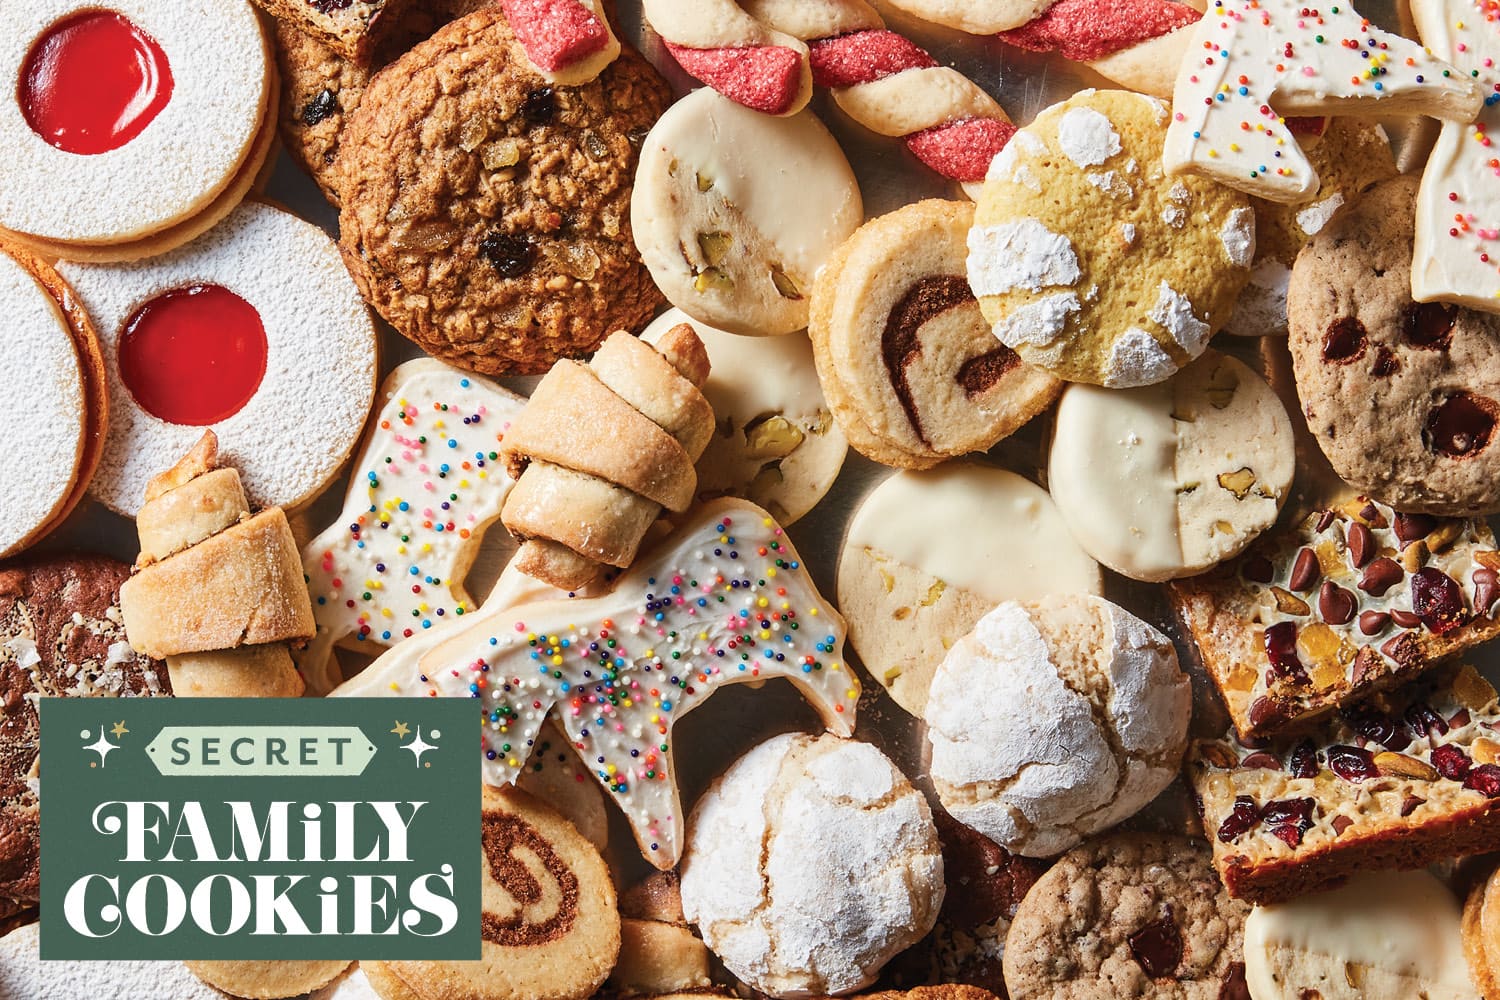 12 Secret Family Cookie Recipes You'll Want to Make Every Holiday Season